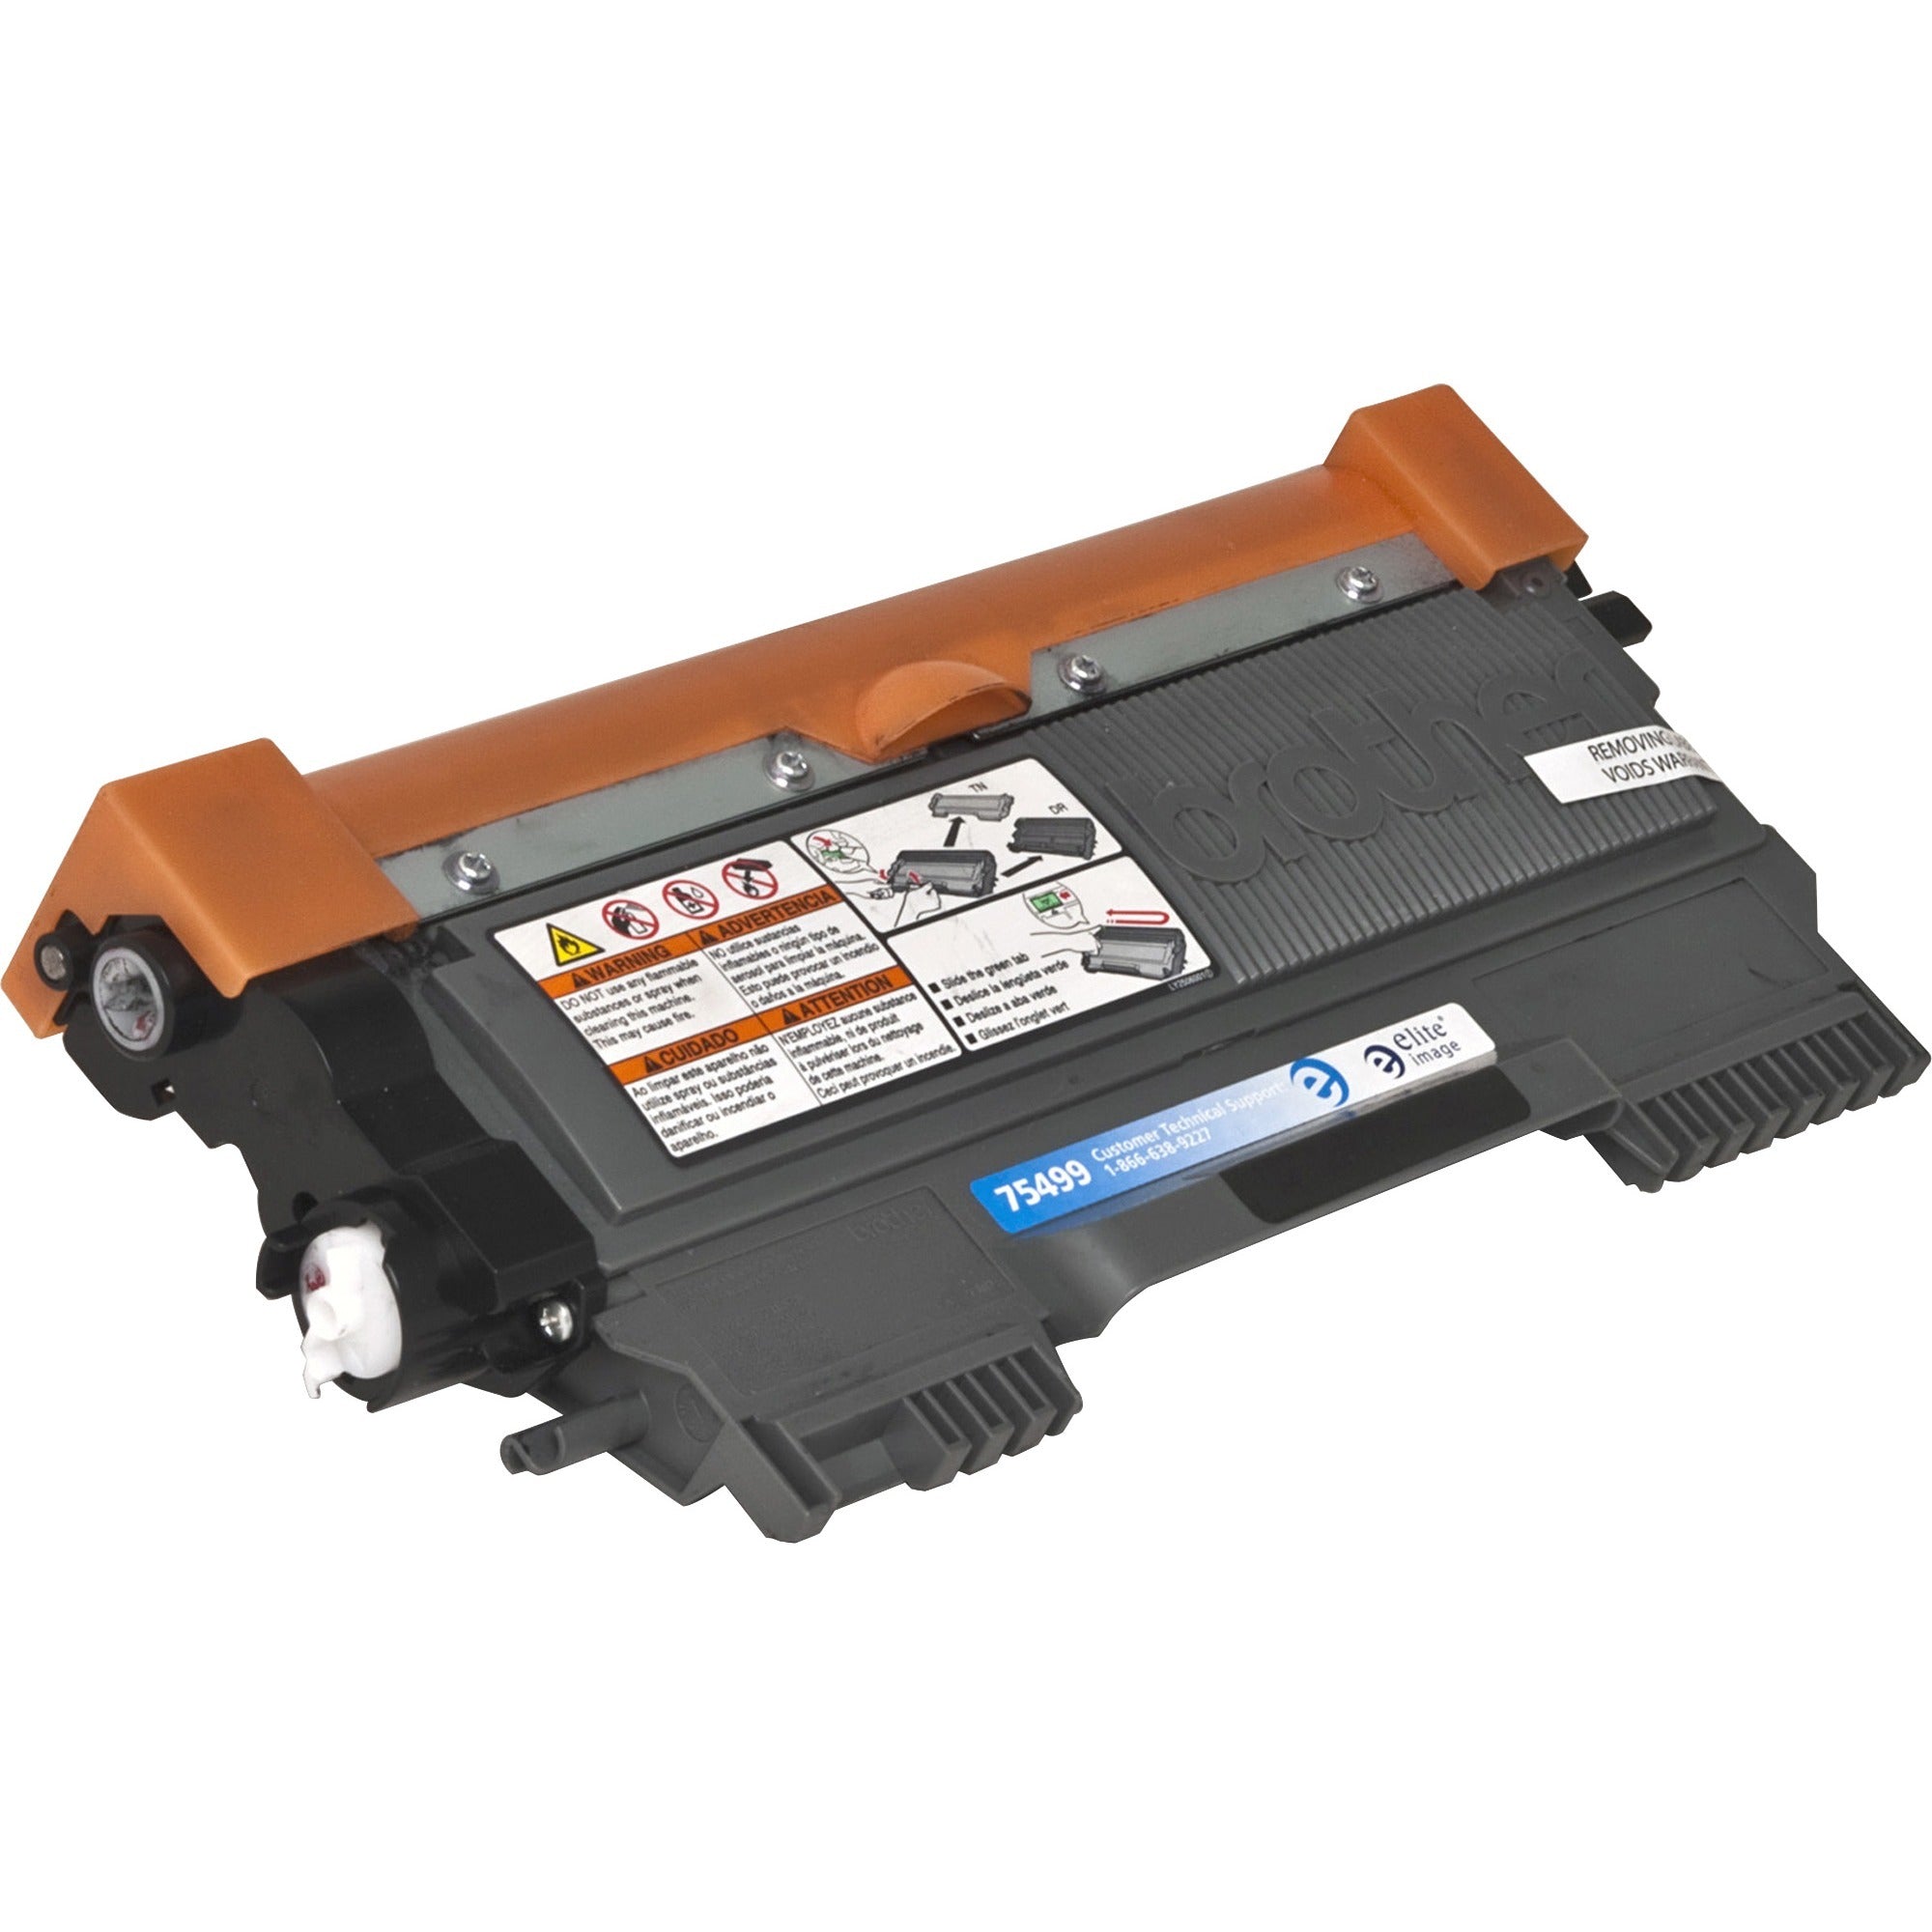 Elite Image Remanufactured High Yield Laser Toner Cartridge - Alternative for Brother TN450 - Black - 1 Each - 2600 Pages - 4